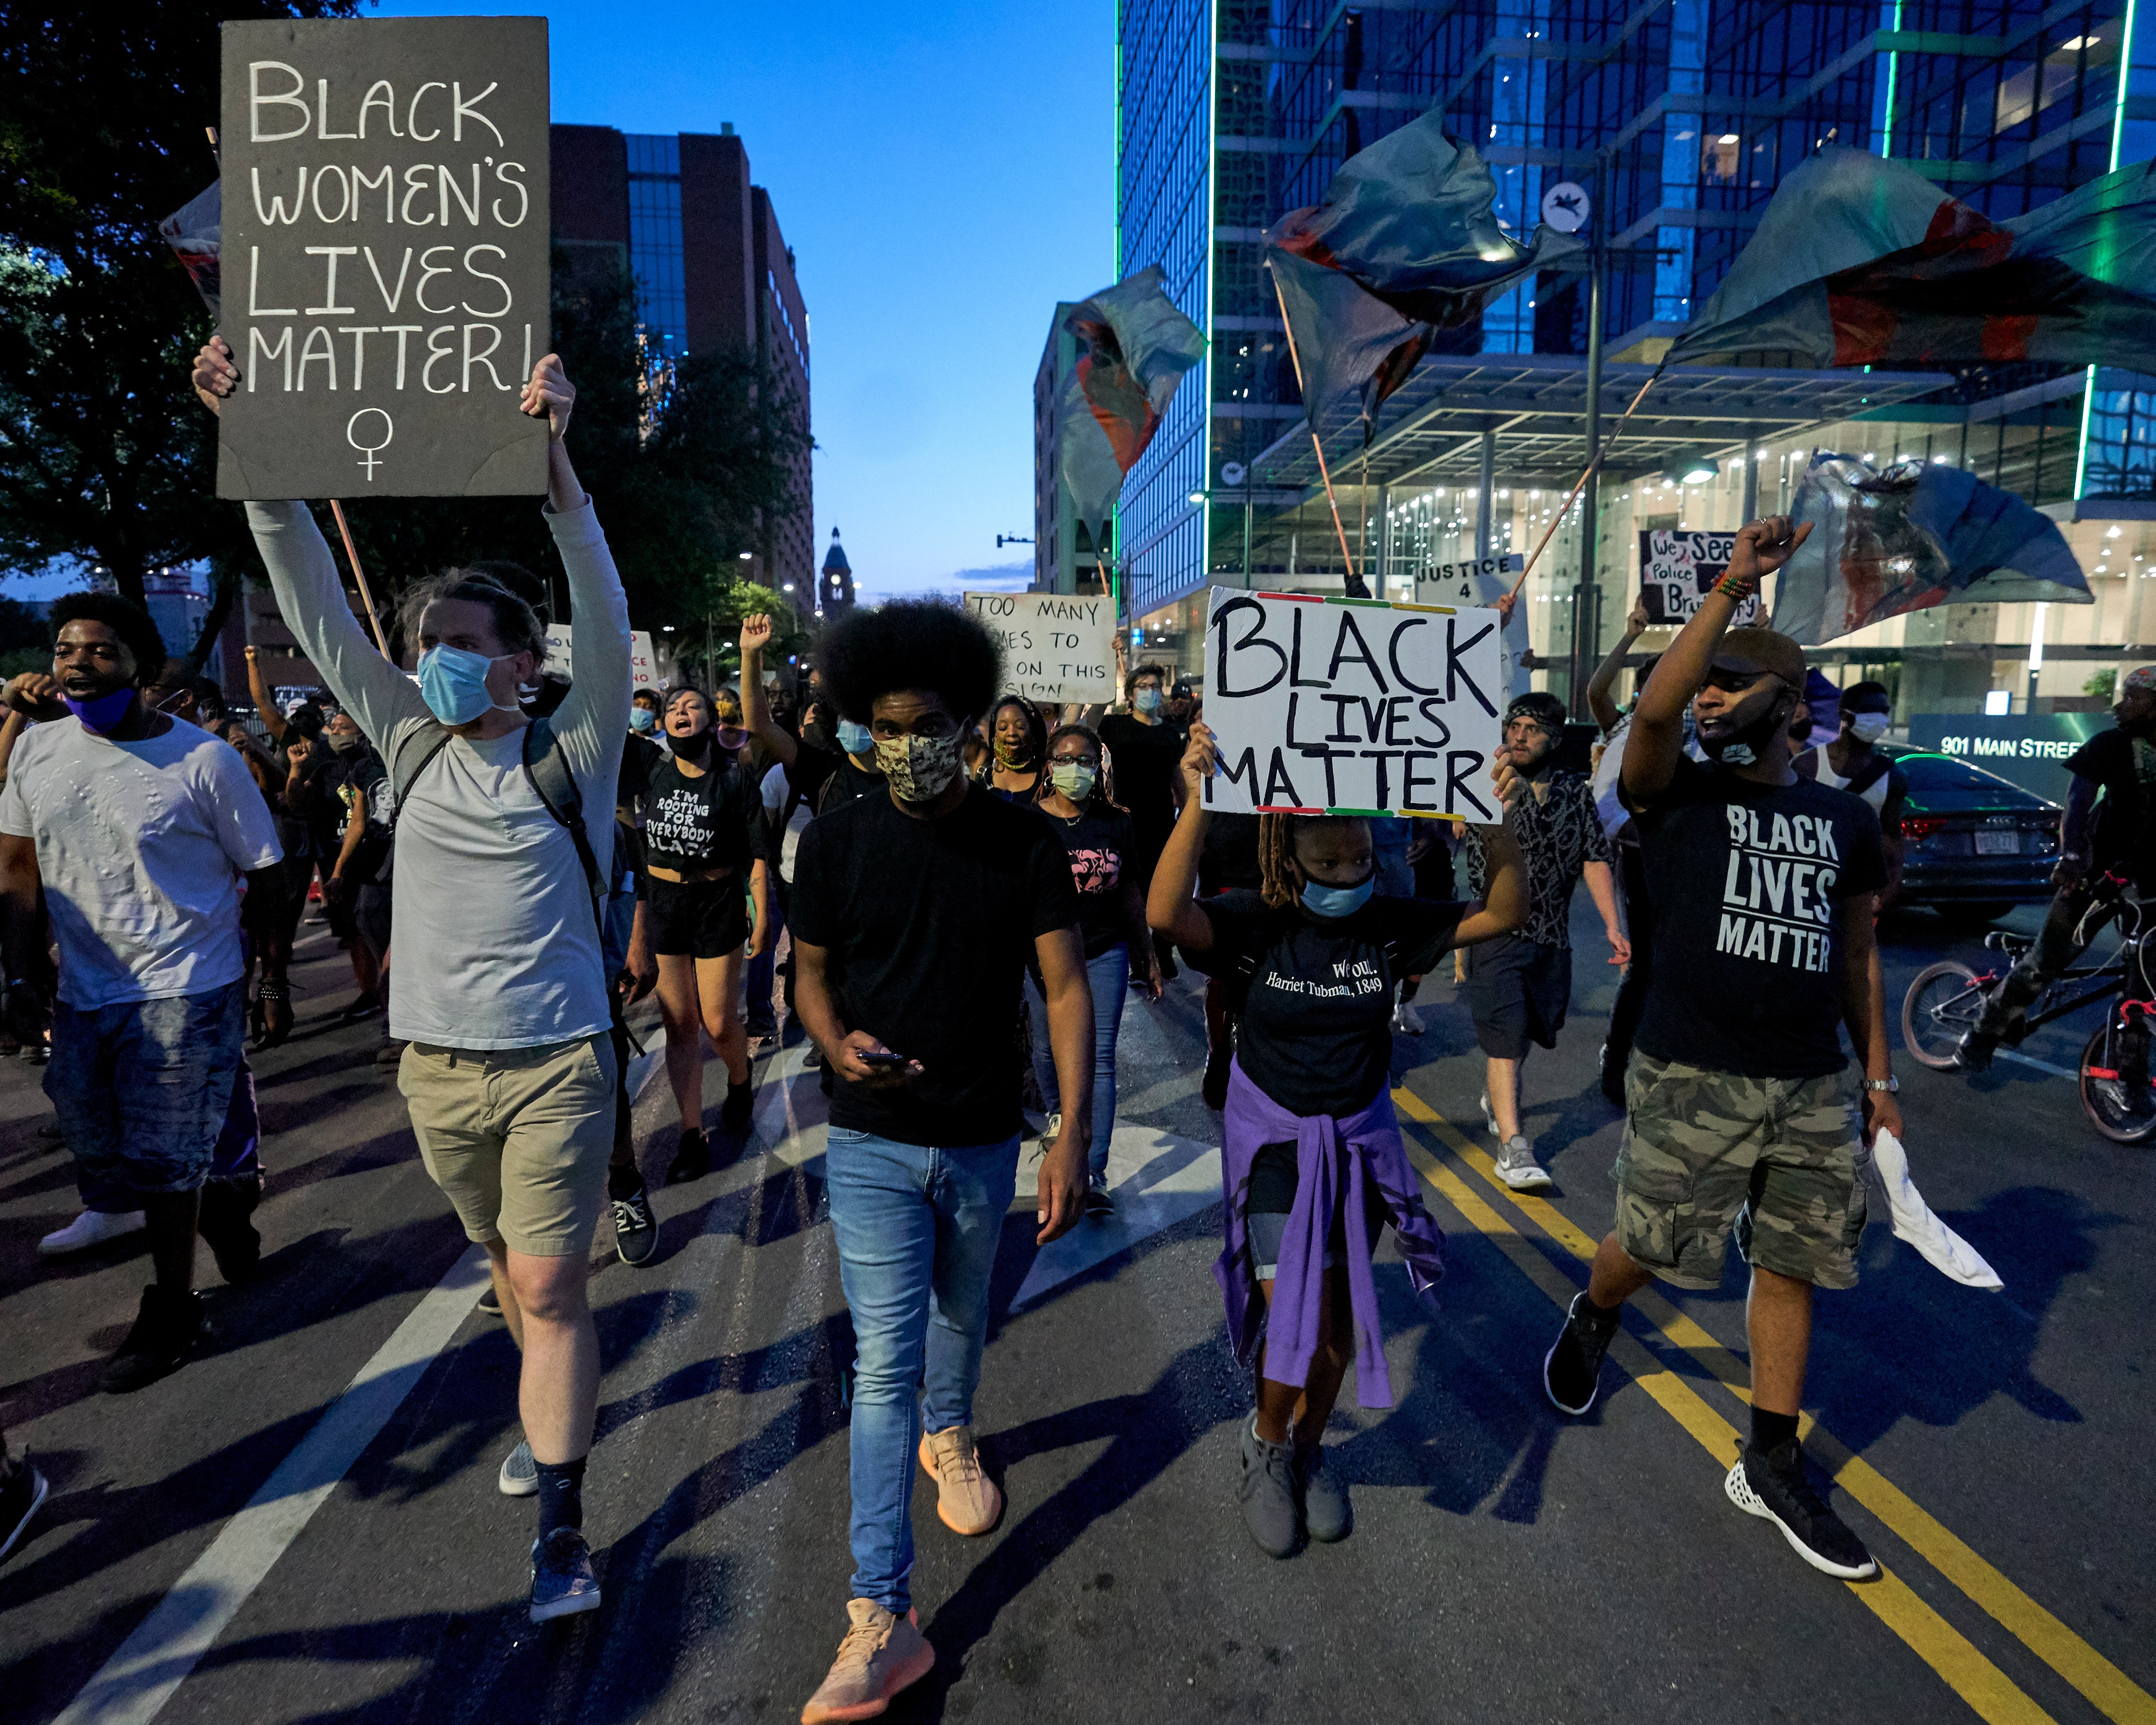 DALLAS, TX - JULY 13: Protesters march down the streets during a rally in remembrance of Sandra Bland on July 13, 2020 in Dallas, Texas. Today is the fifth anniversary of Bland's death by hanging in her jail cell three days after her arrest at a confrontational traffic stop. (Photo by Cooper Neill/Getty Images)